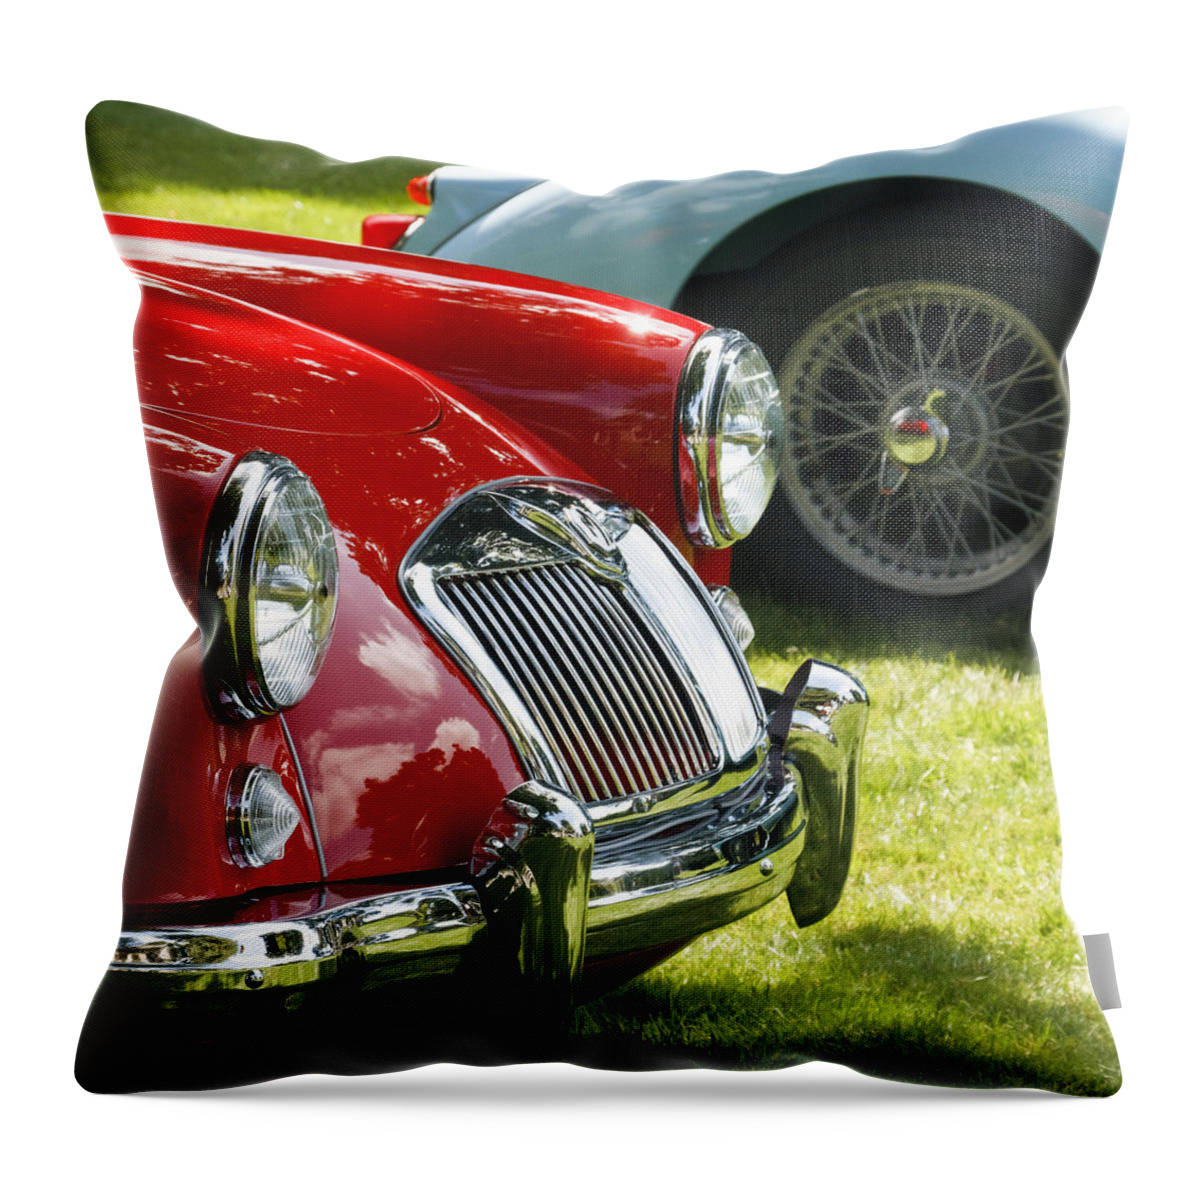 Red Mg Throw Pillow featuring the photograph Red M G by Wes and Dotty Weber